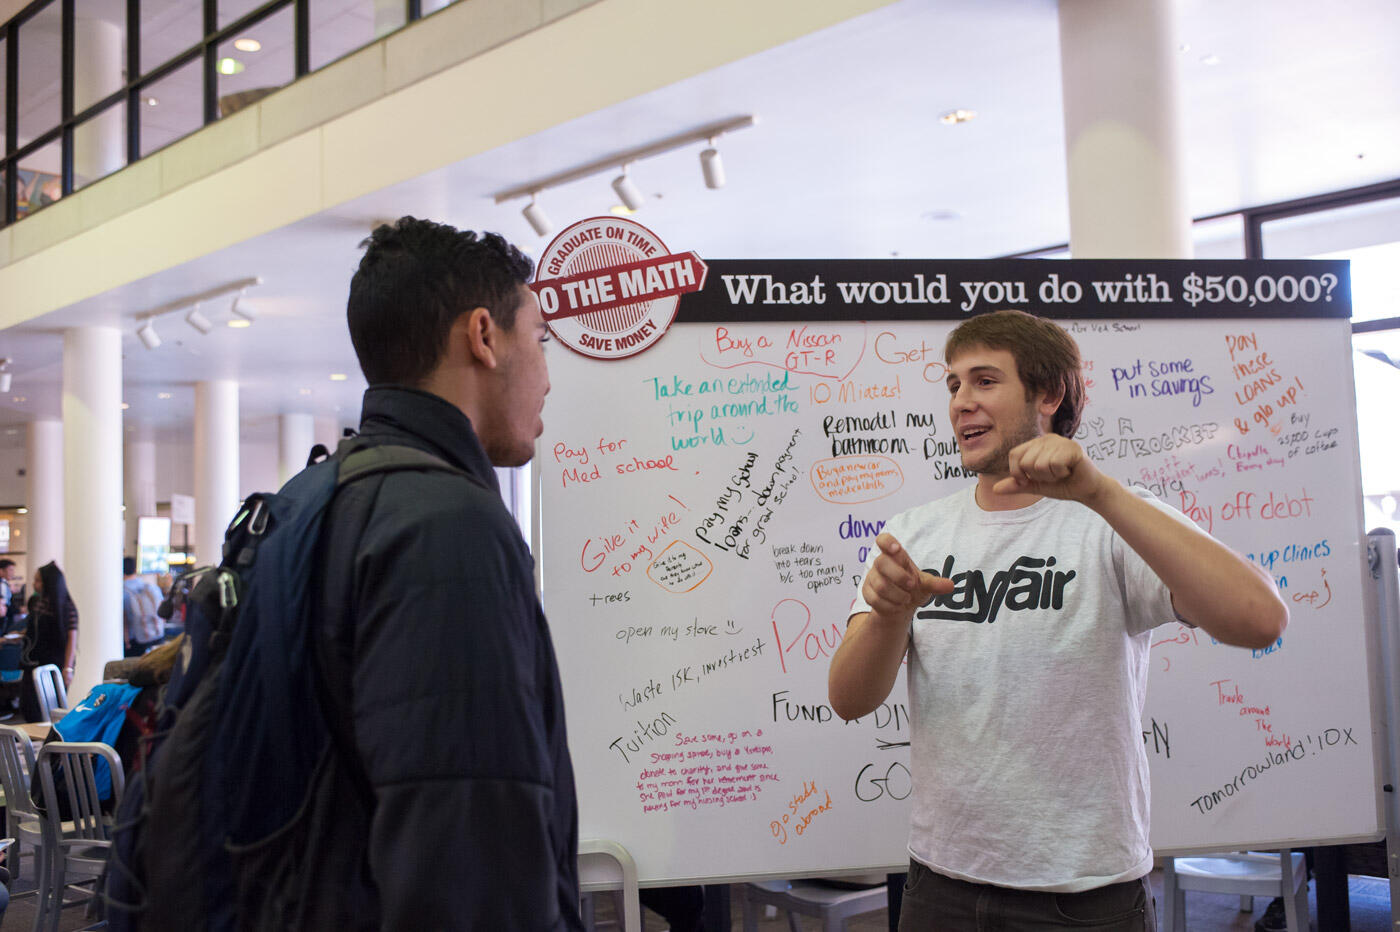 Sophomore Dominic Gavan of Leesburg (right) explains to sophomore Issmeal Anany the financial benefit of committing to taking 15 credits a semester.